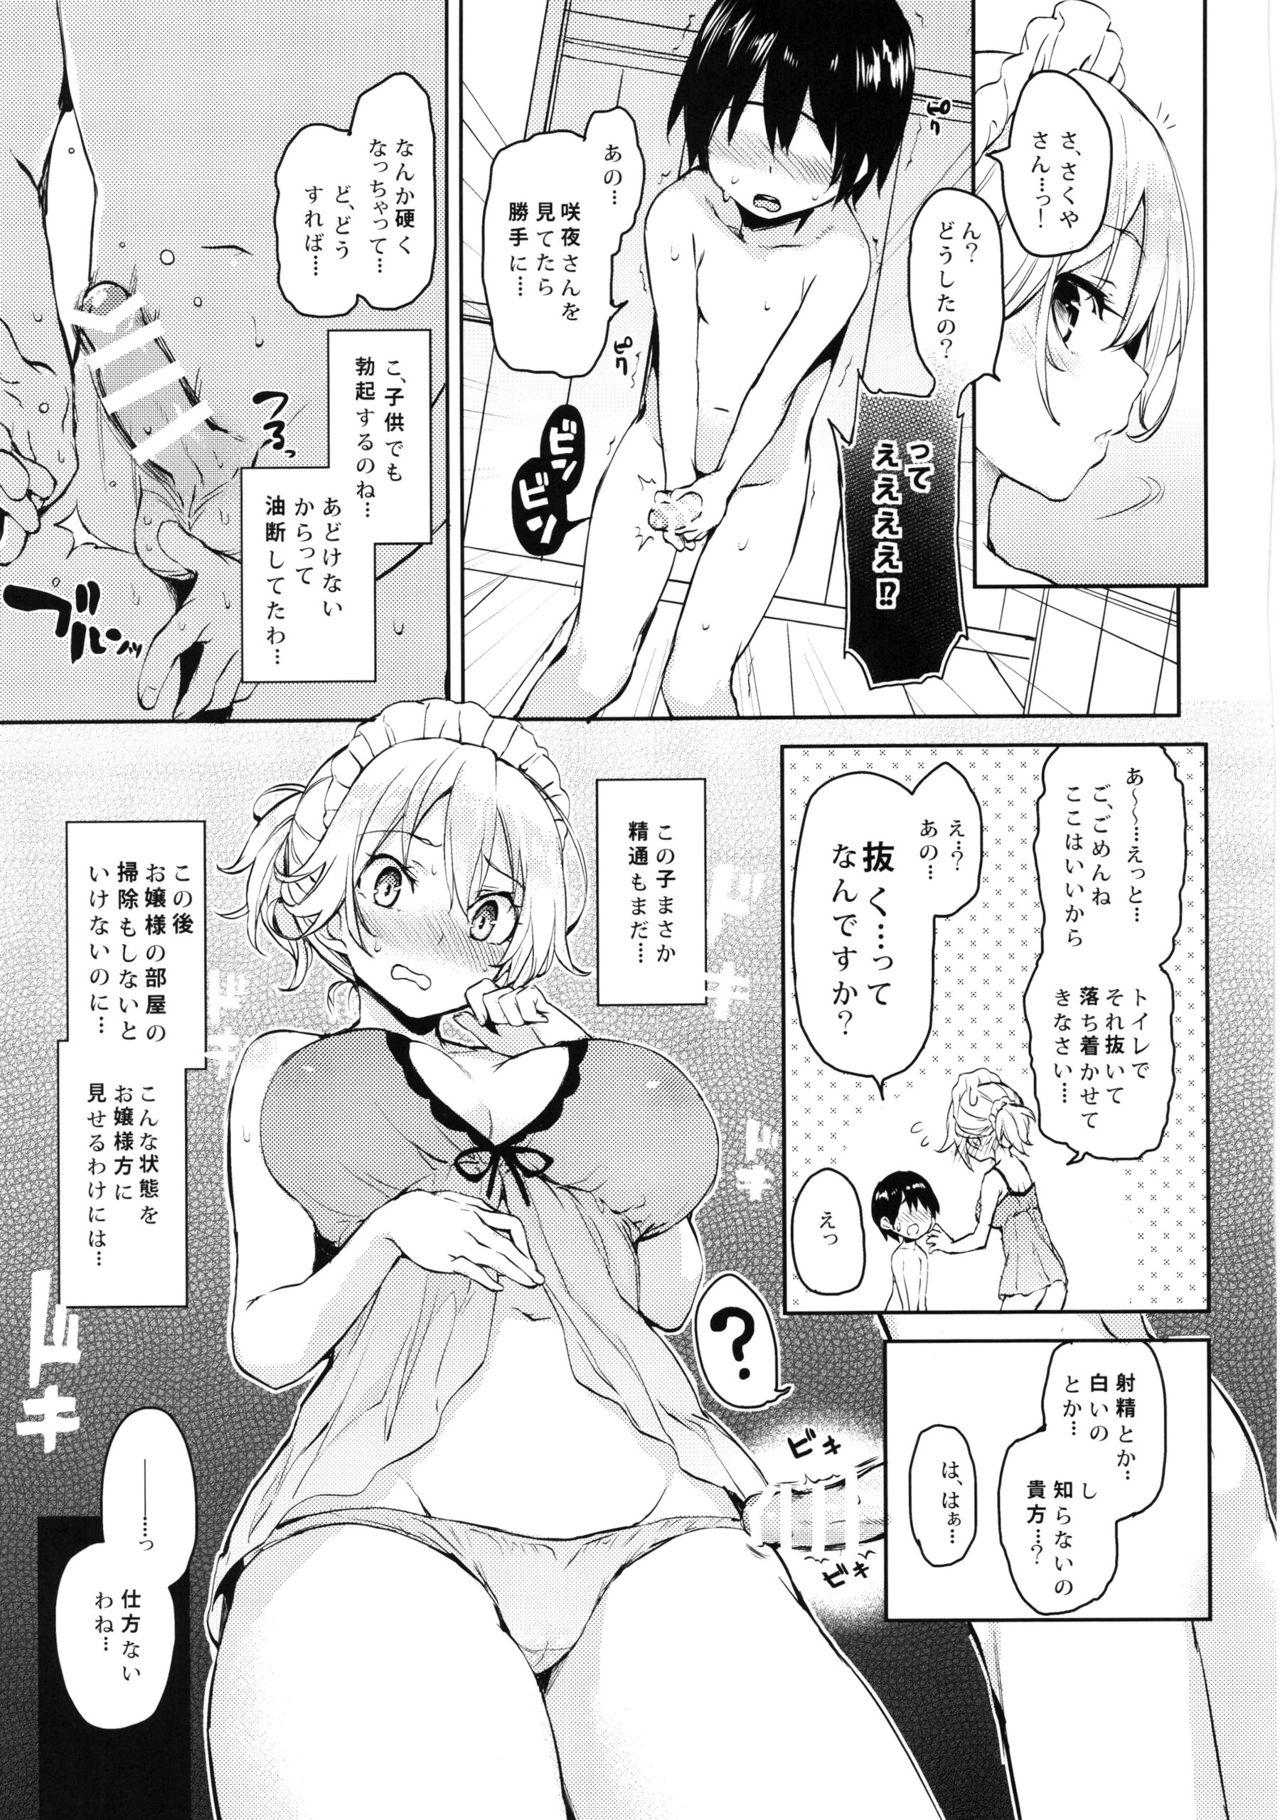 Hidden ANMITSU TOUHOU HISTORY Vol.2 - Touhou project Hot Wife - Page 6